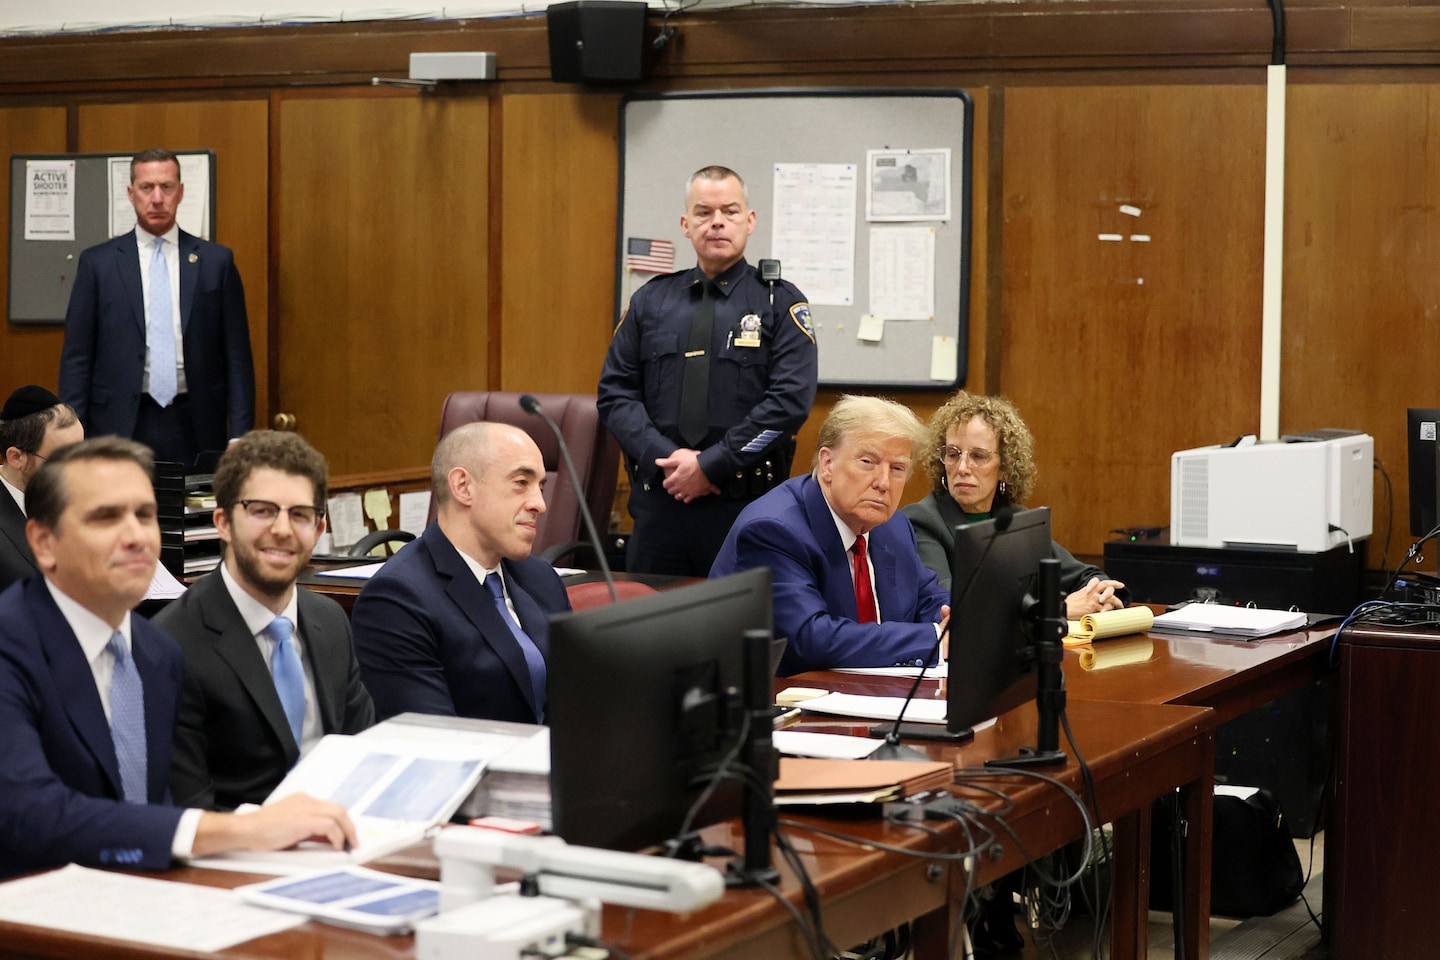 Trump can still become president if he is convicted of a crime